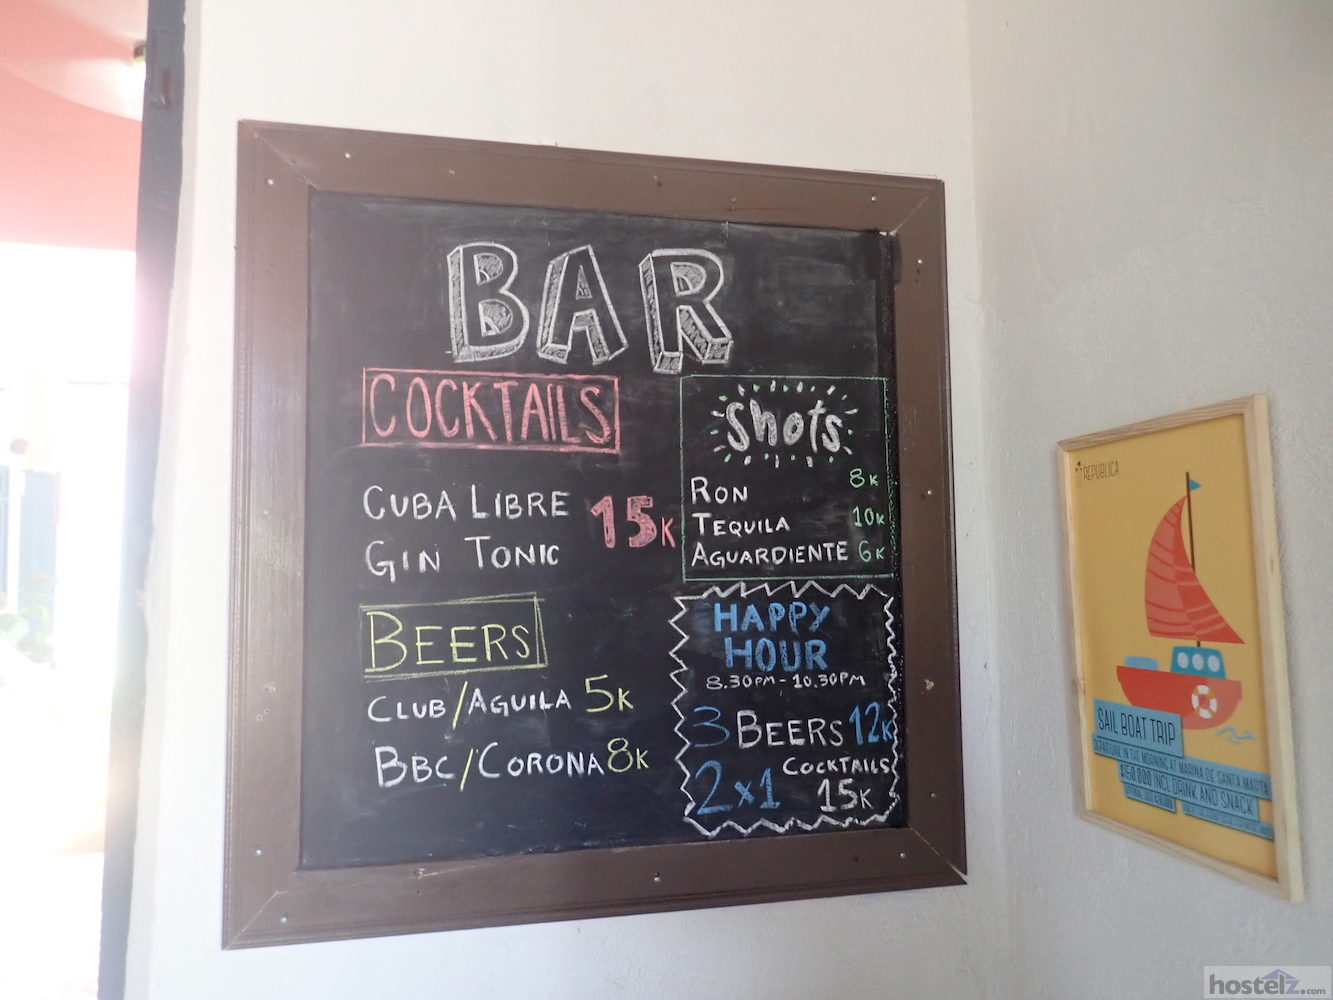 Bar prices (correct as of May 2018)